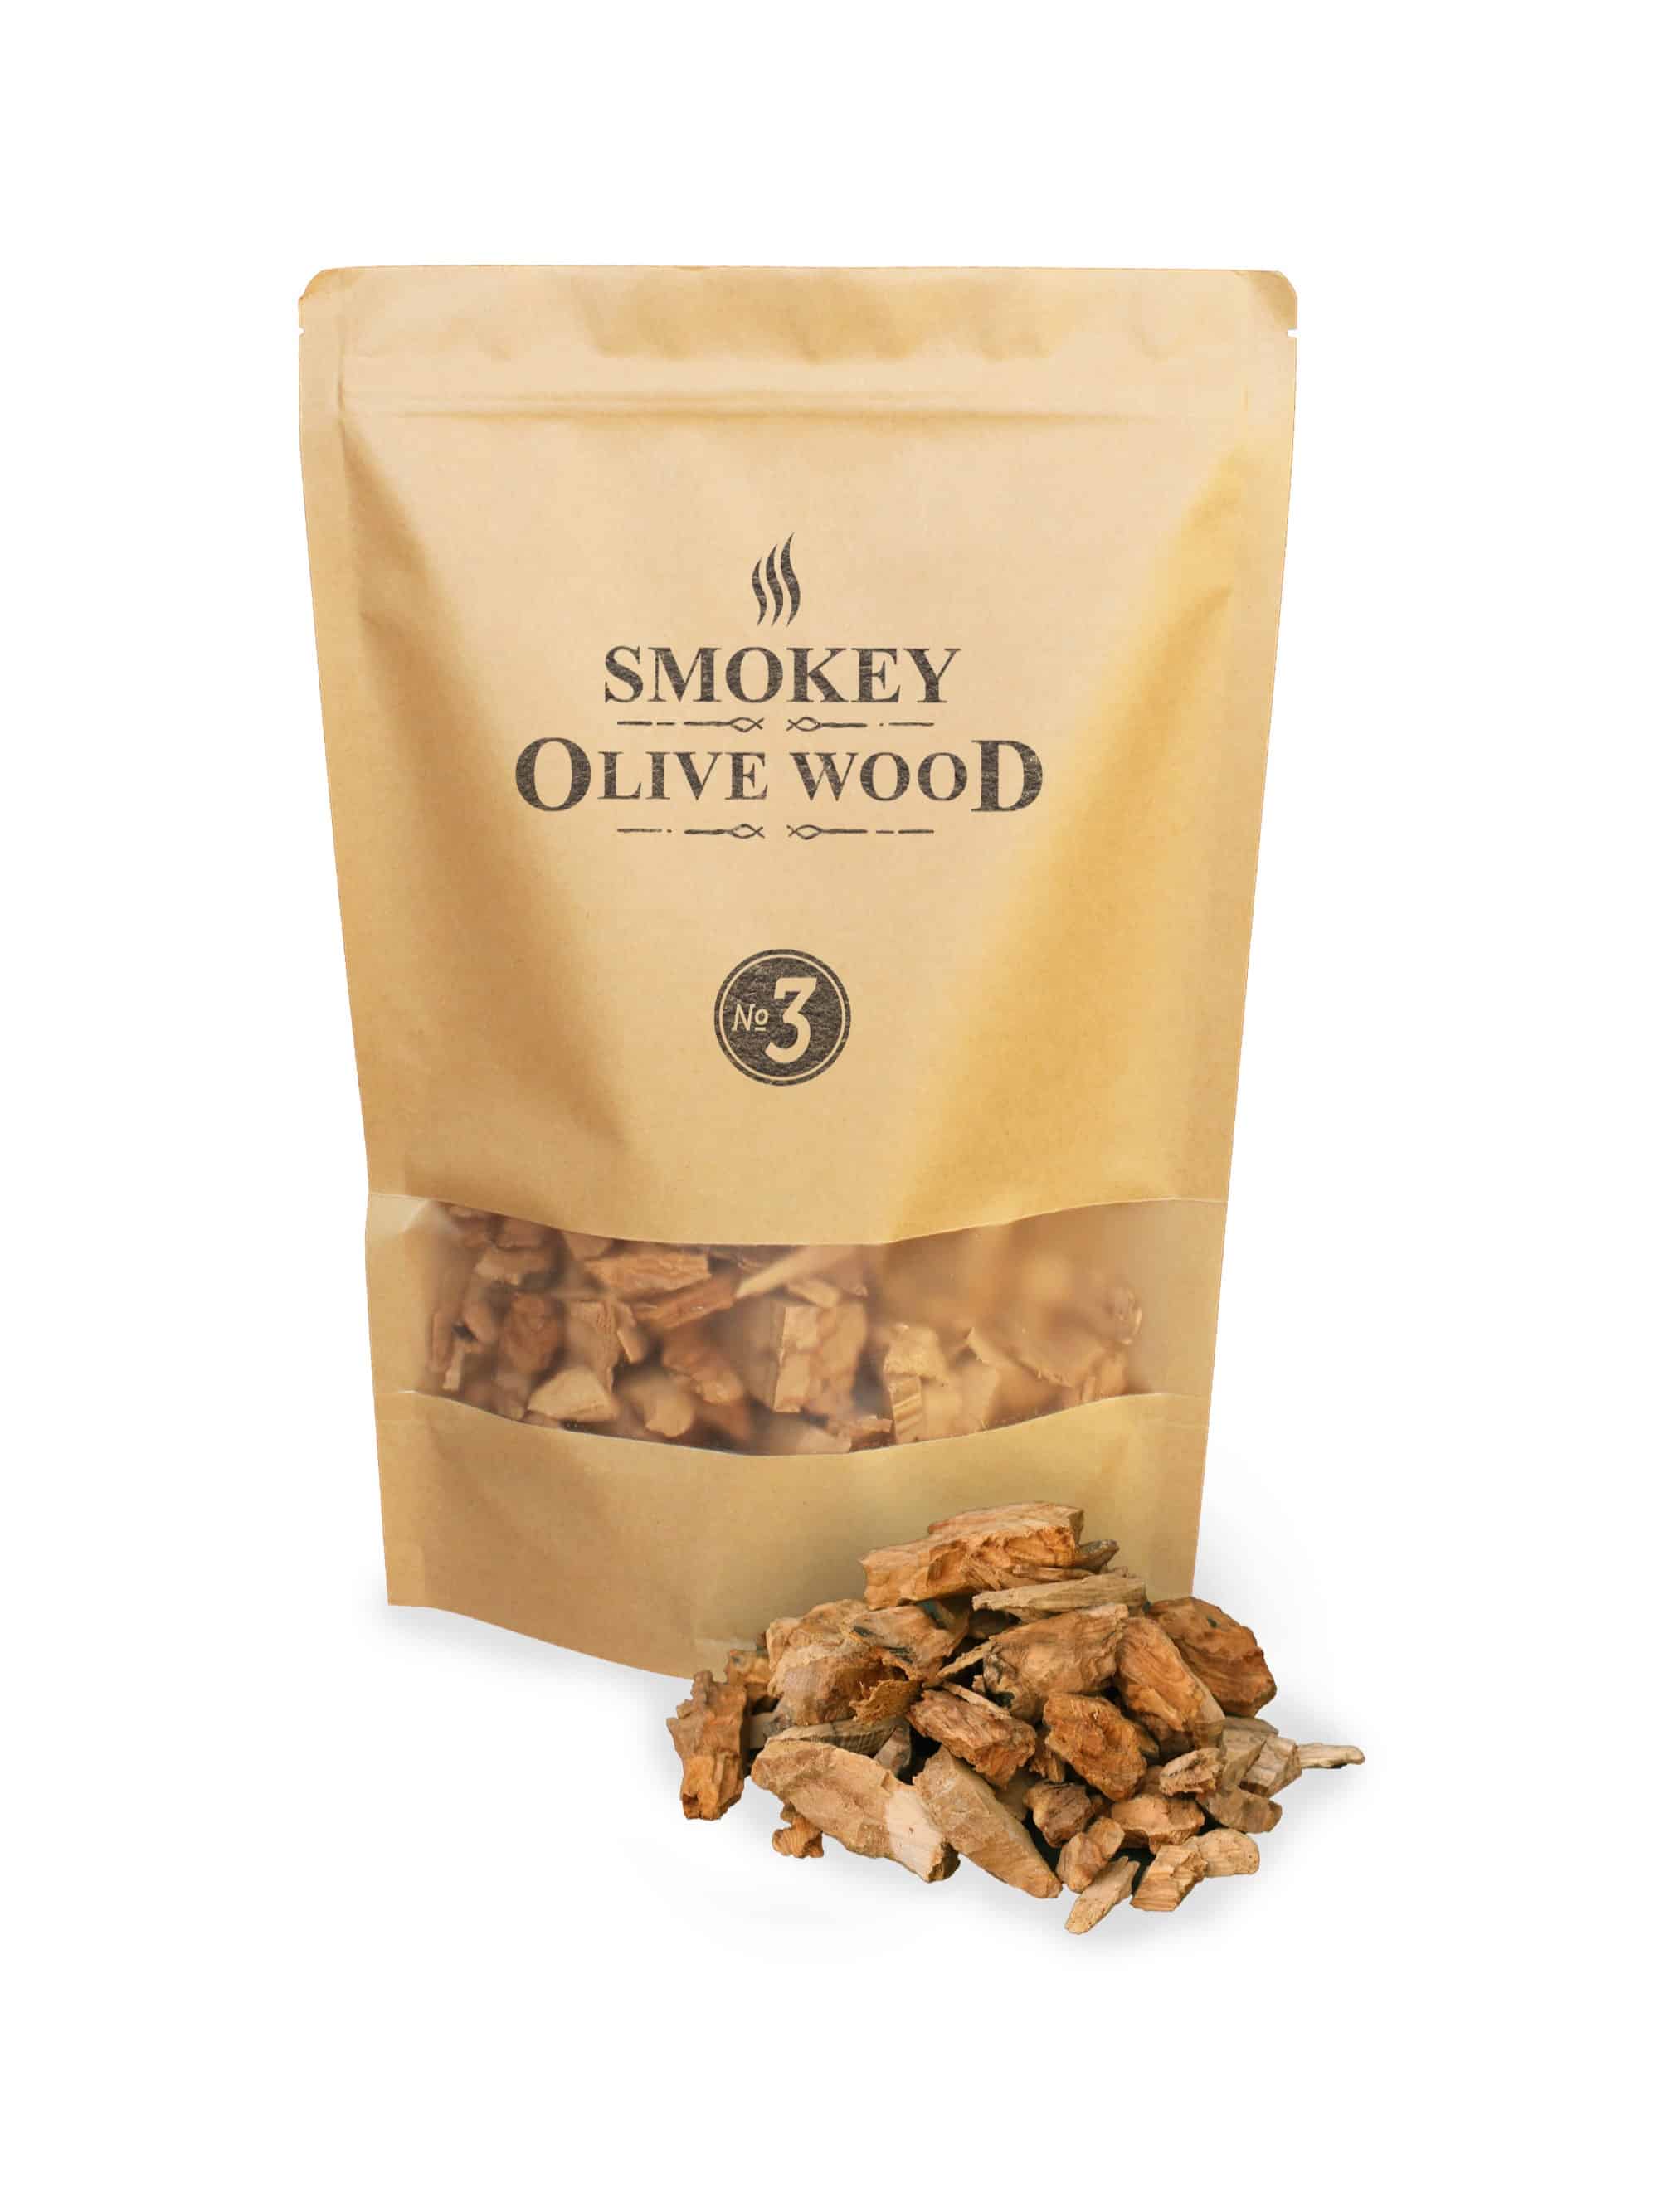 Smokey Olive Wood Chips For Smoking